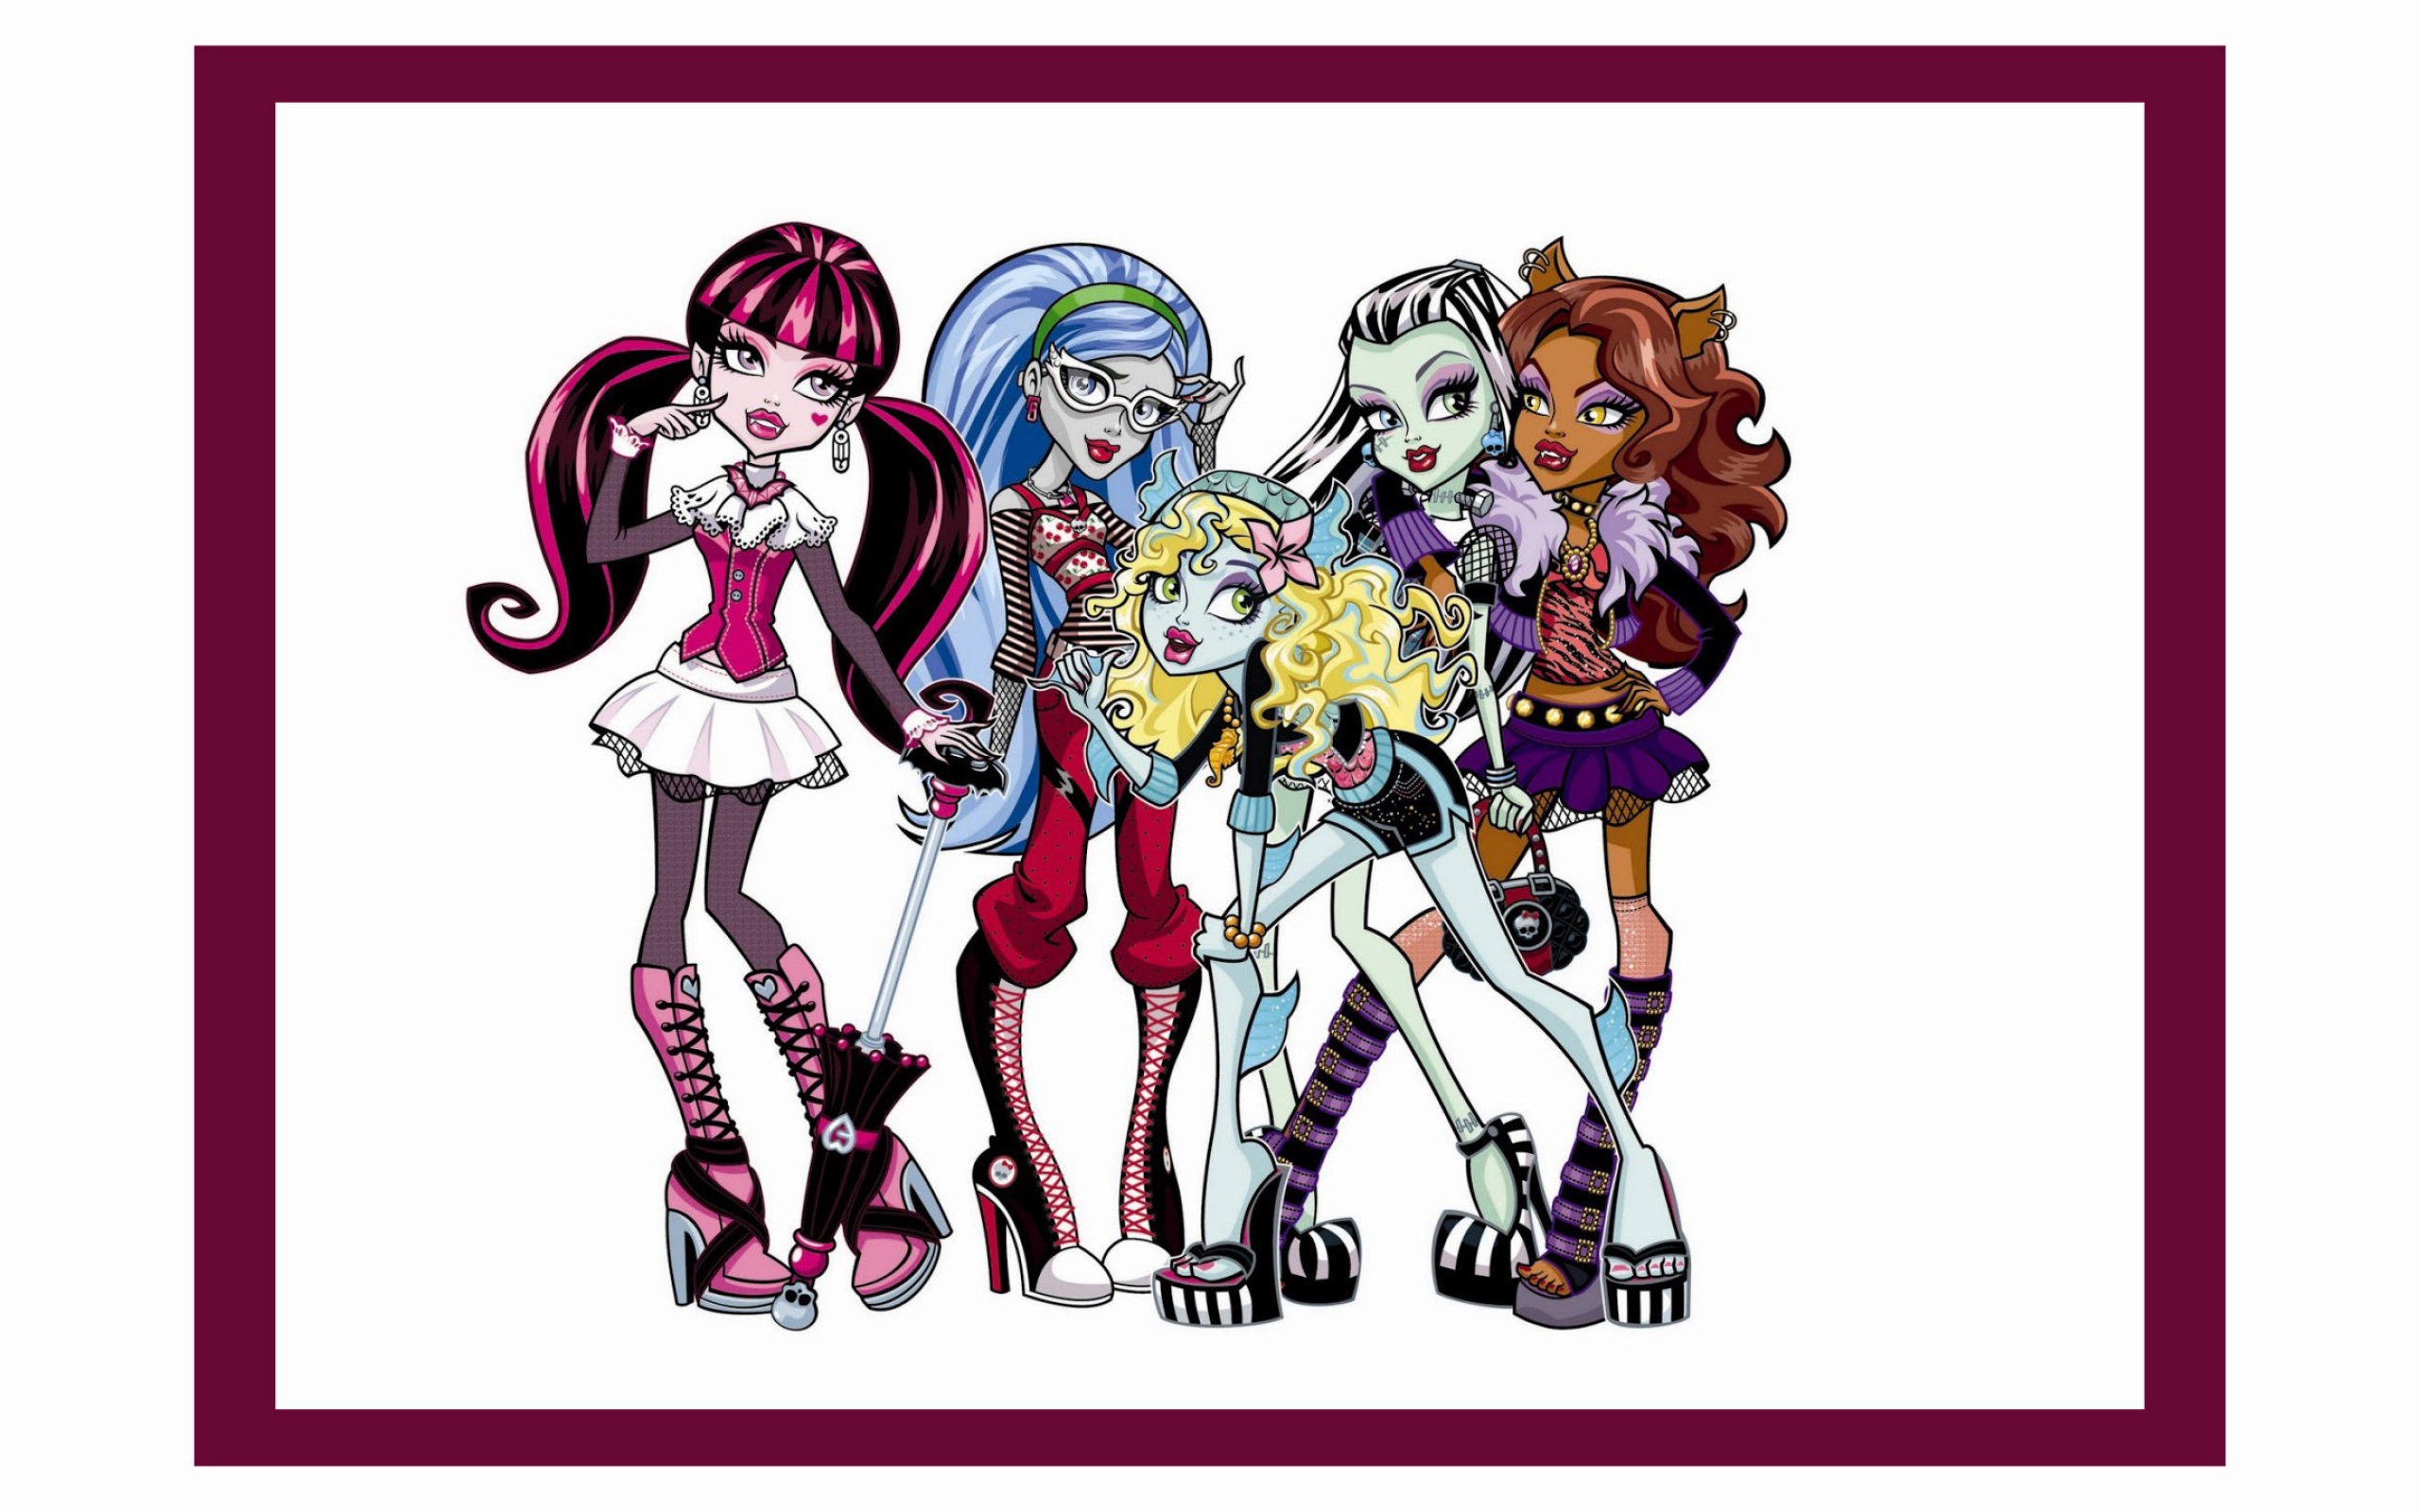 Monster High: A multimedia-supported doll franchise from Mattel that was launched in 2010. 2560x1600 HD Wallpaper.